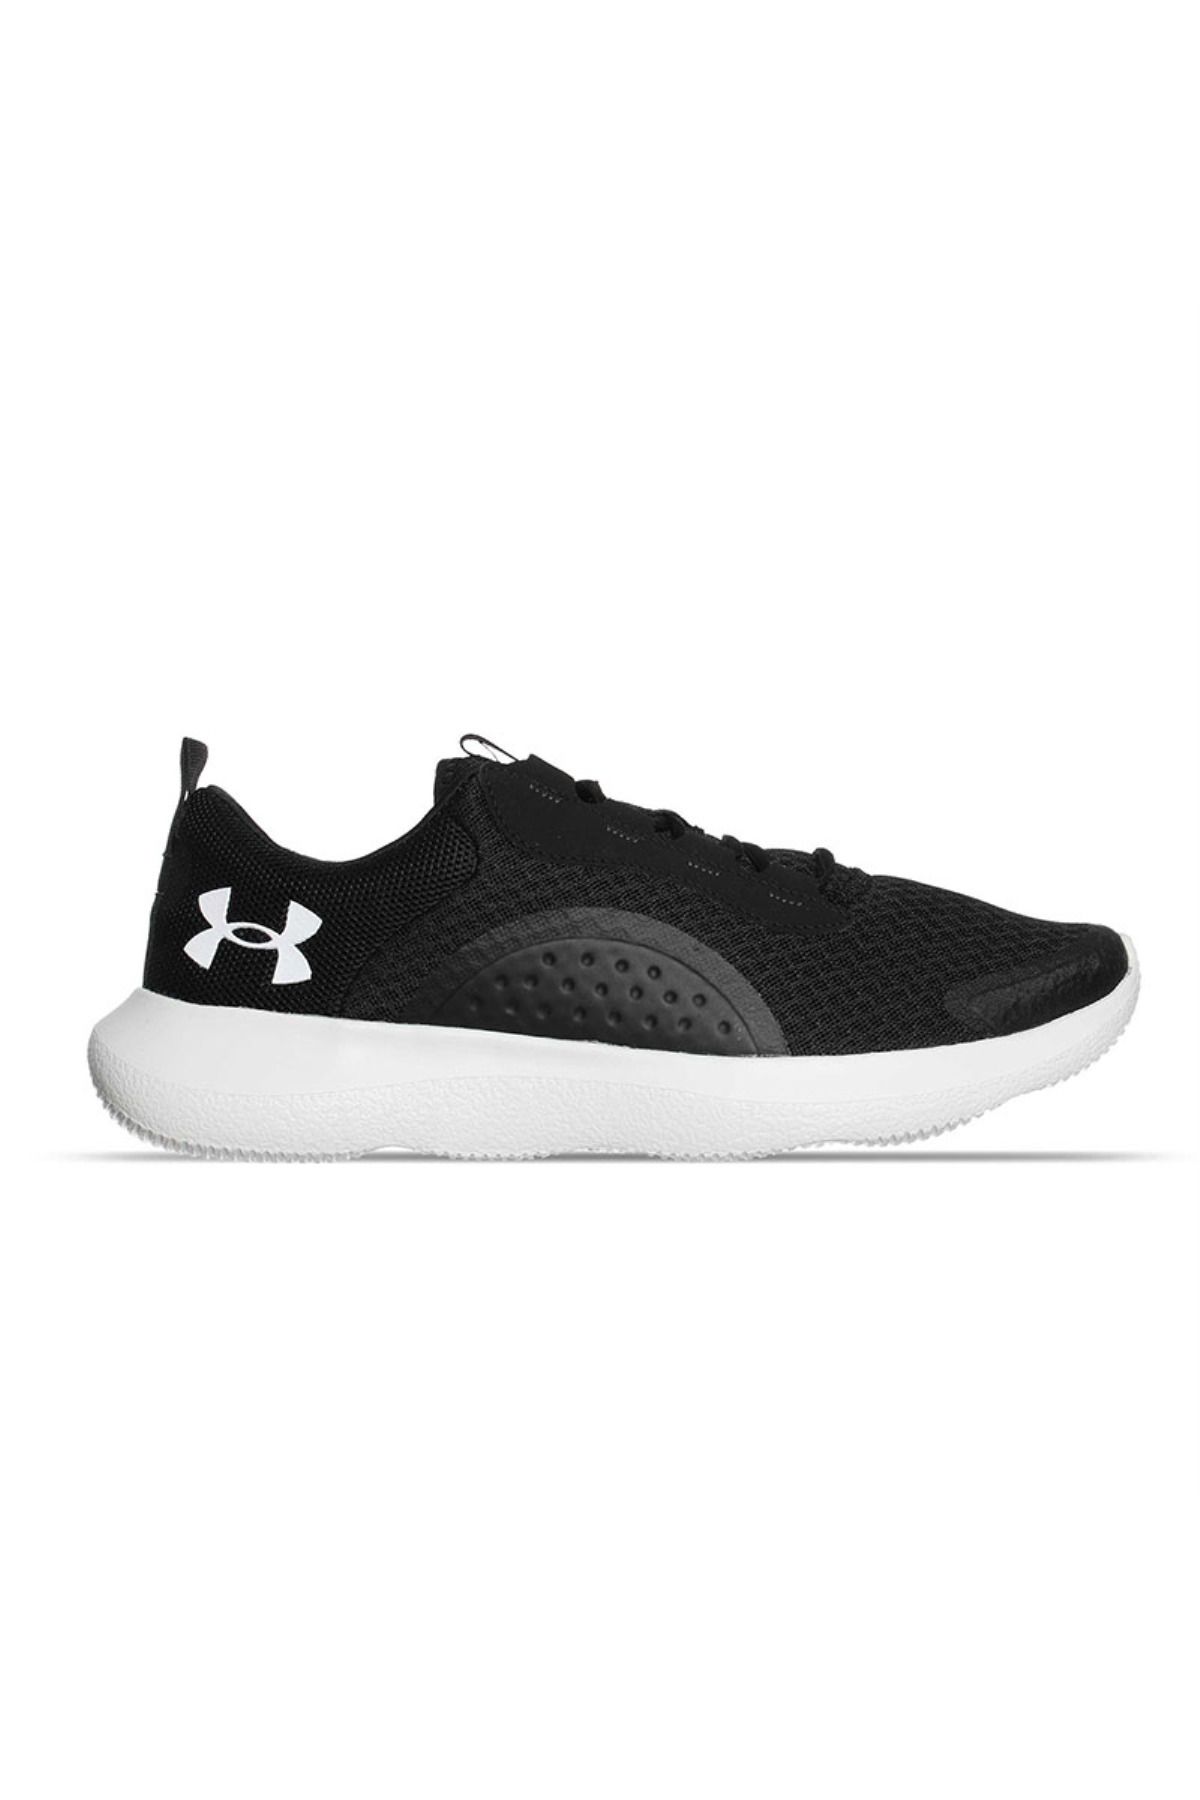 Under Armour Ua Victory